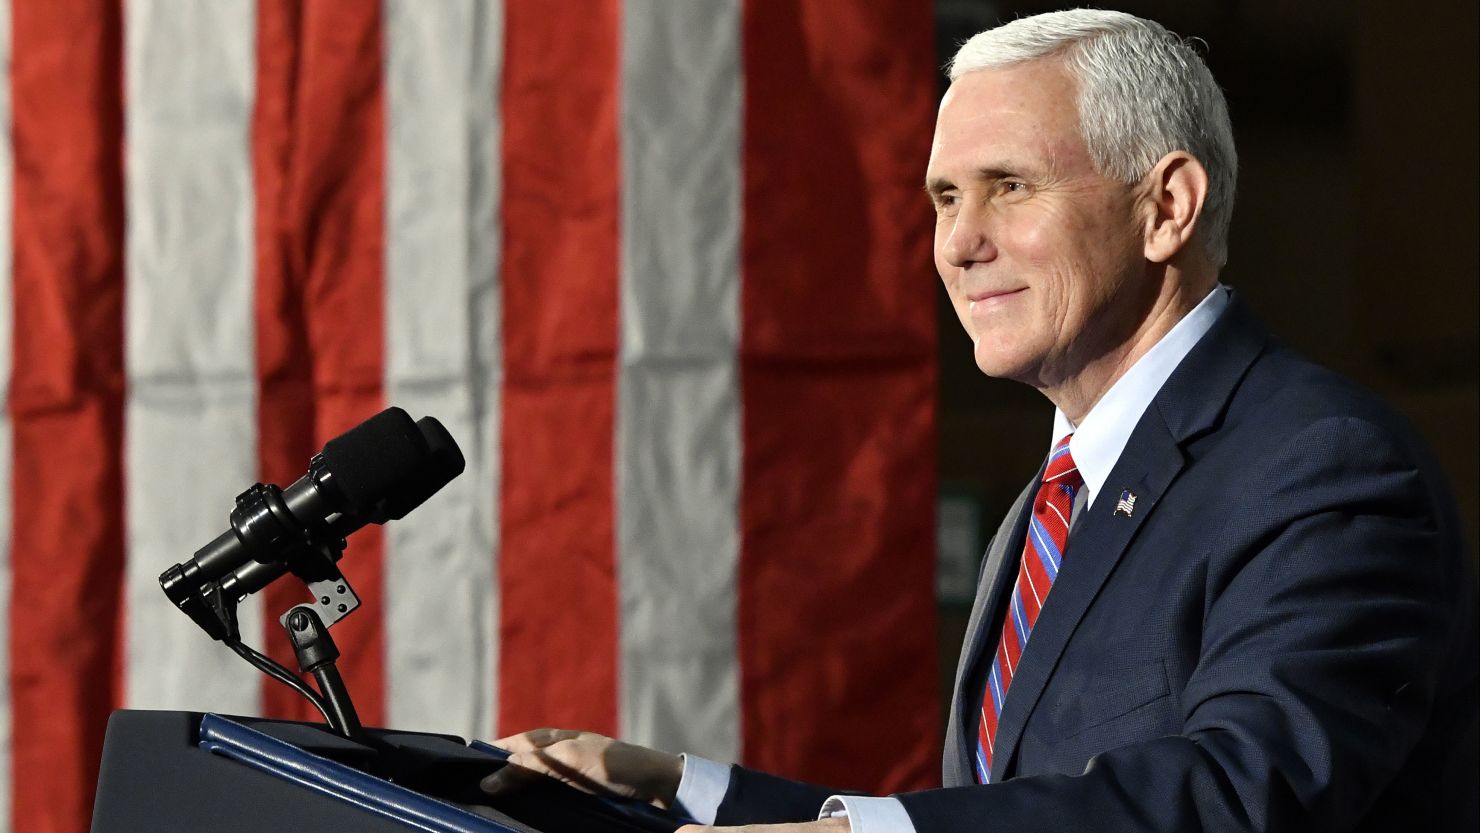 Vice President Mike Pence speaks at the Trans Parts and Distribution Center, Saturday, March 11, 2017, in Louisville, Ky. Pence said Obamacare failed the nation and the Trump administration needs the backing of rank-and-file Republicans to pass their health care overhaul. 